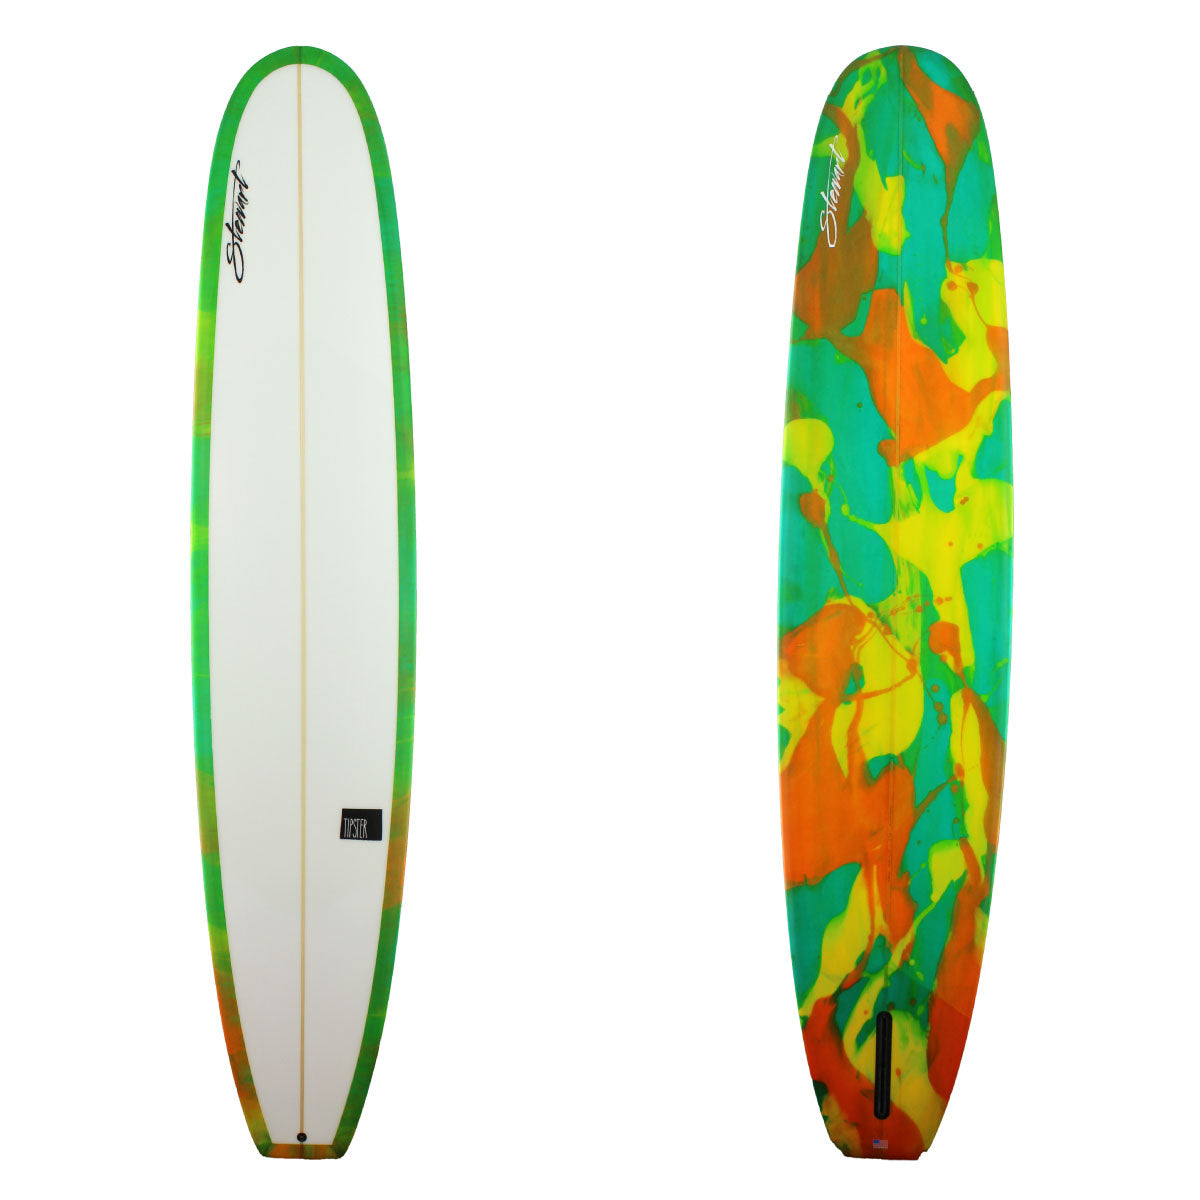 Stewart Surfboards 10'0 TIPSTER with green, orange, yellow resin swirl bottom and rails, clear white deck